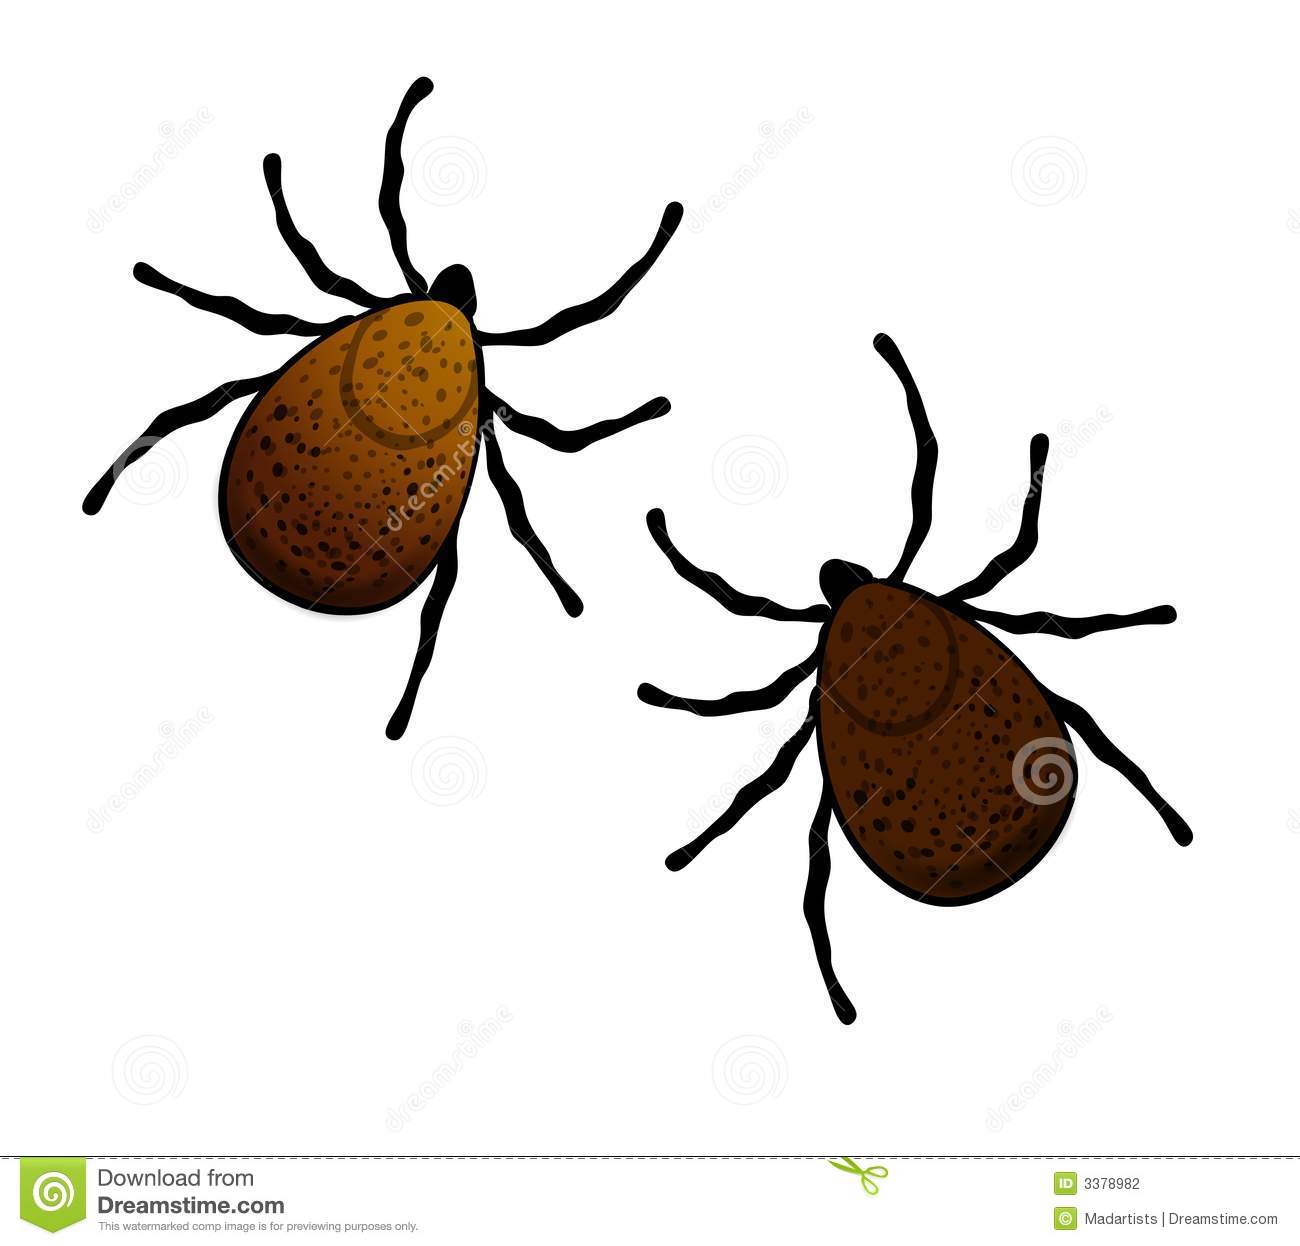 Bug clipart tick. Mosquito and 